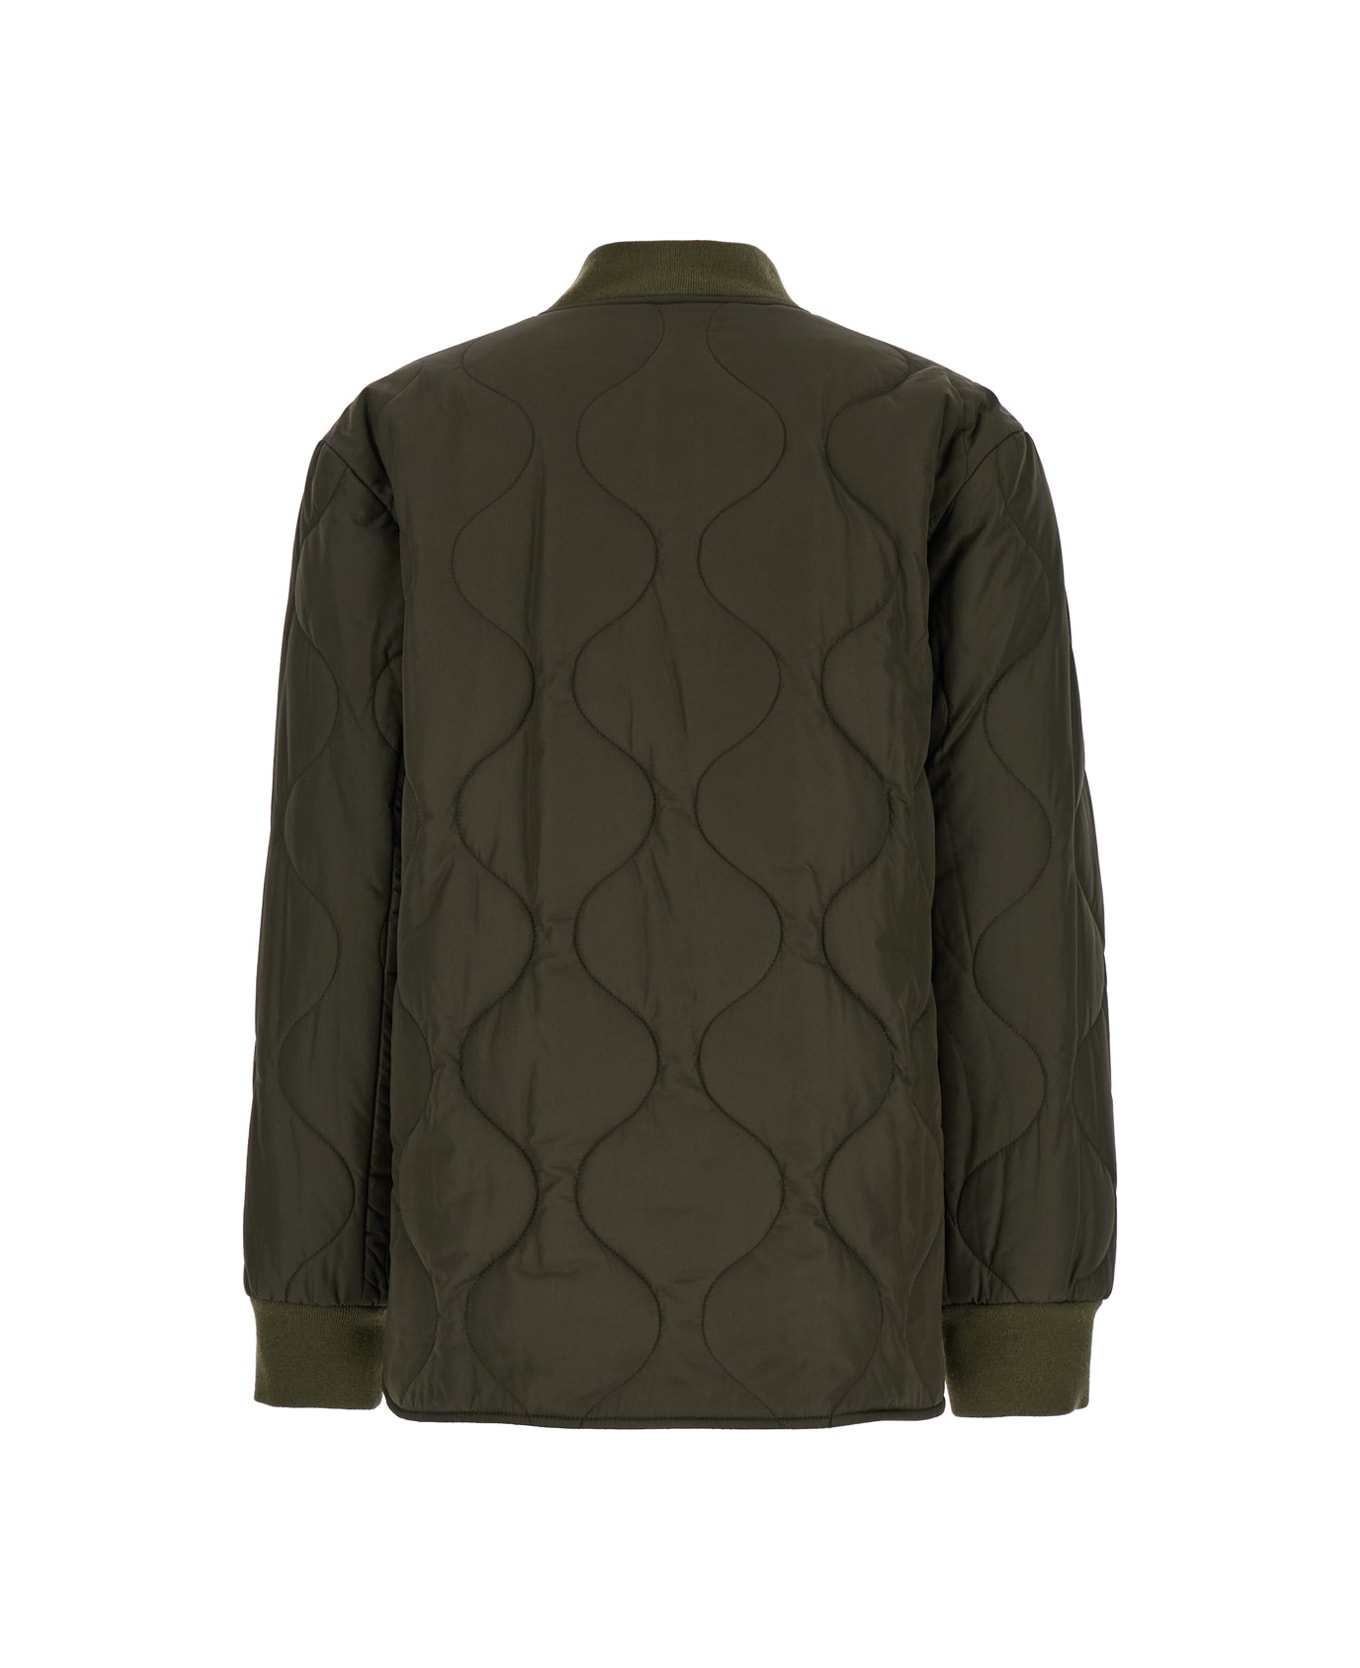 A.P.C. 'camila' Military Green Jacket With Snap Buttons In Quilted Fabric Woman - Green